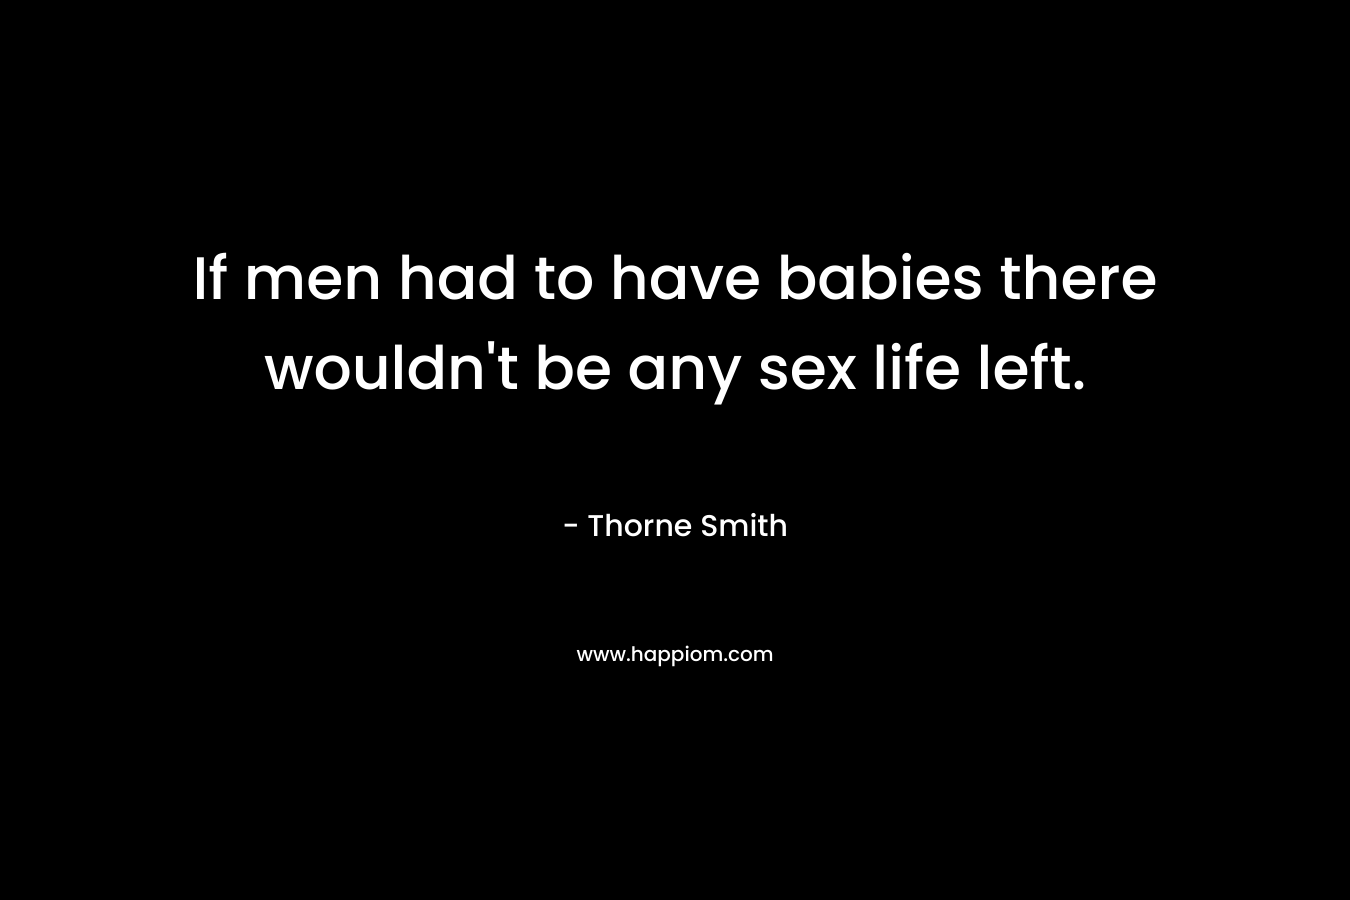 If men had to have babies there wouldn't be any sex life left.